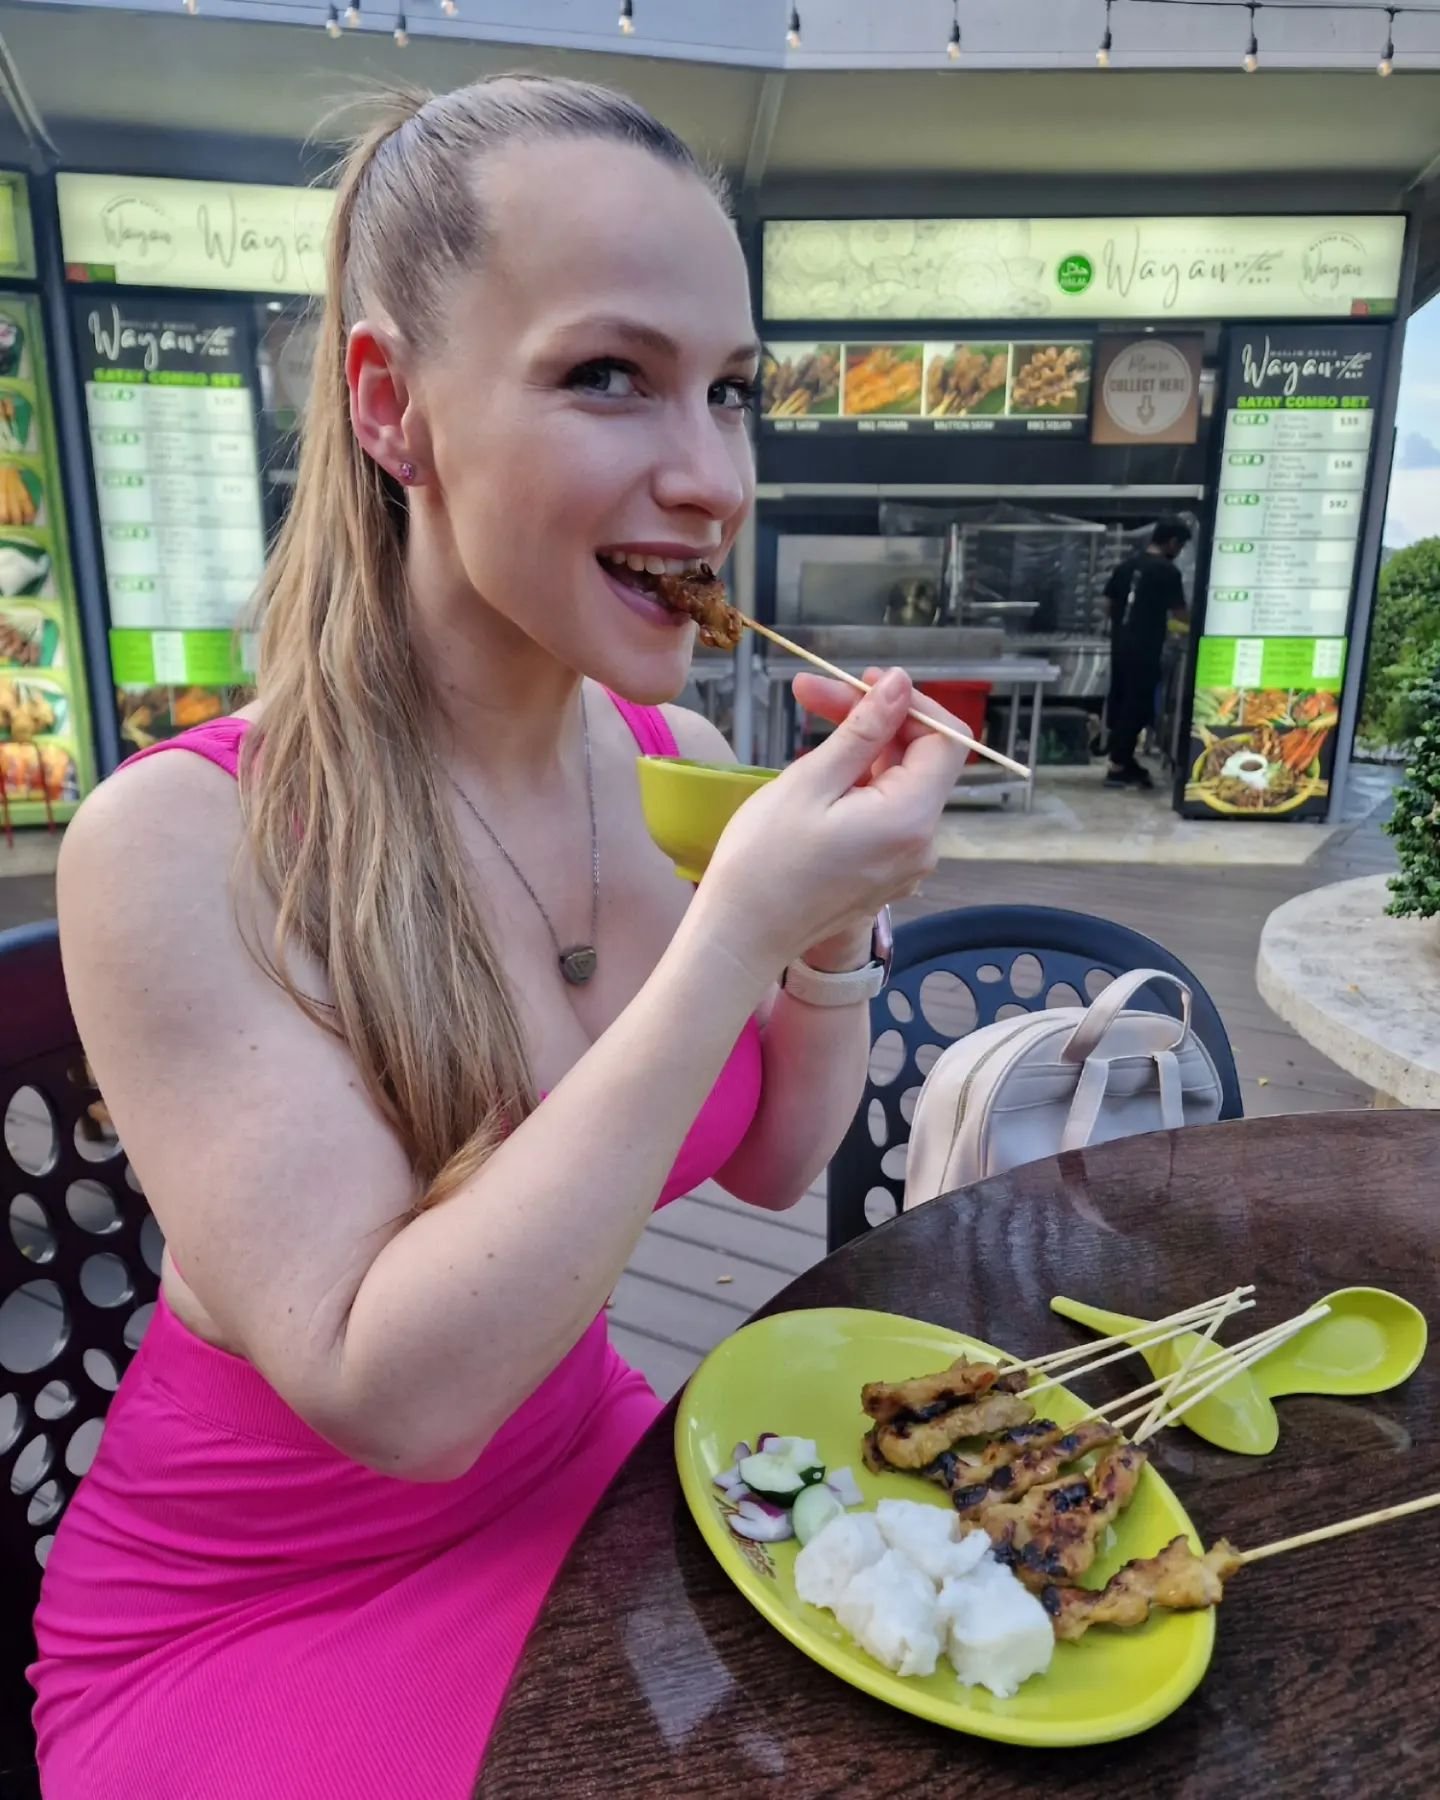 Singapore 🇸🇬 Just some of the food we've enjoyed !
As you can see, I LOVE chicken satay 😋 
Hawker food markets, a very interesting breakfast, pandan cake, michelin ice cream 🍦 and plenty more !!!

#Singapore #food #foodies #Singaporefood #hawkerf